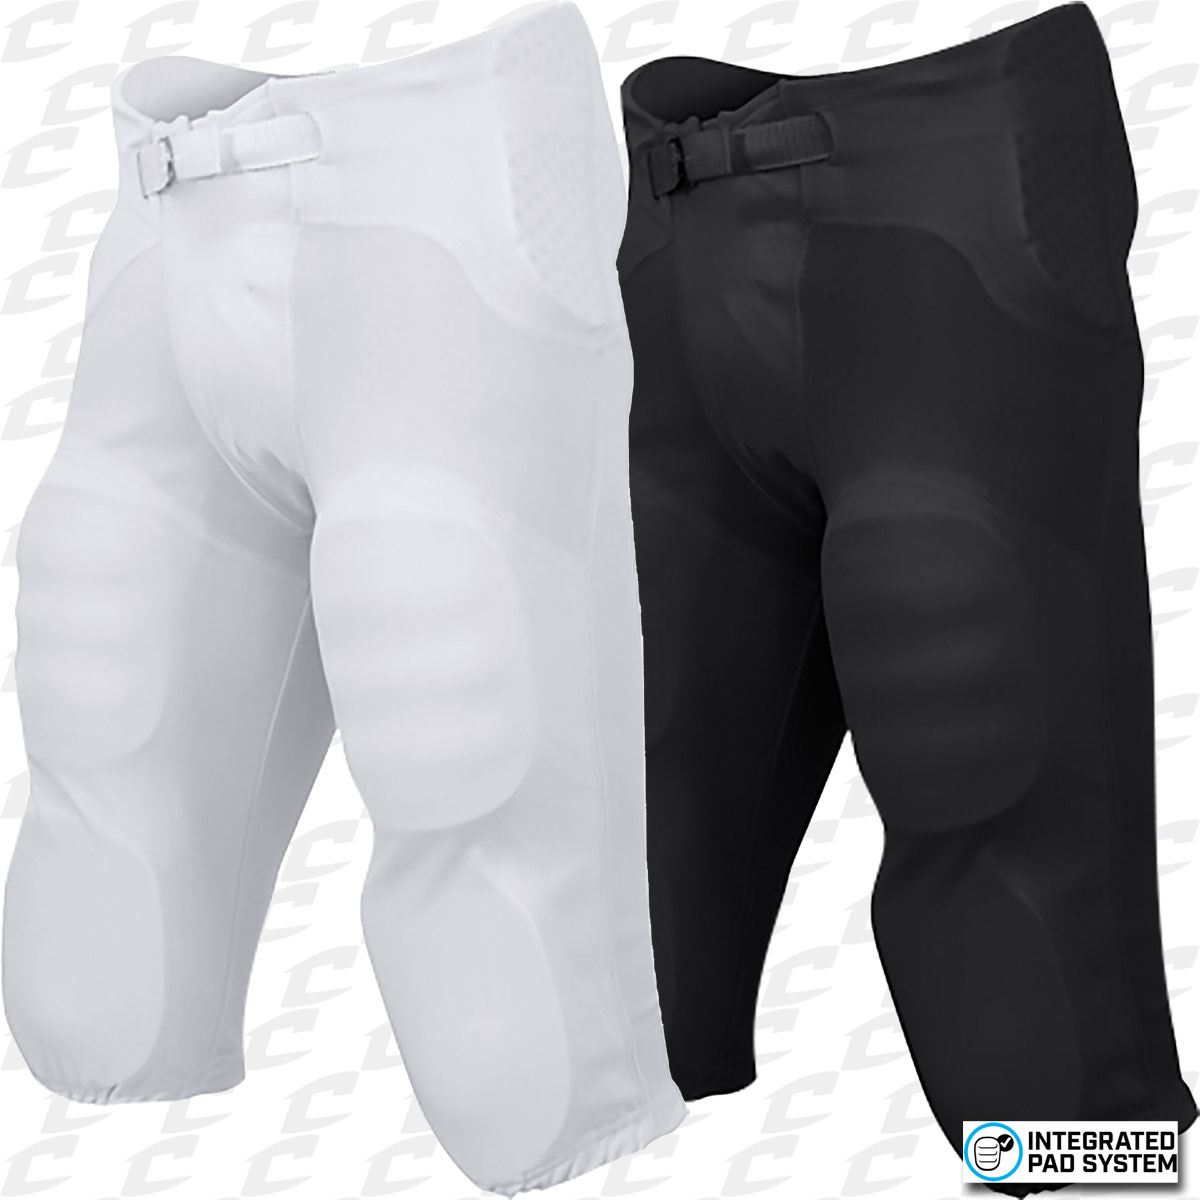 Champro Youth Football Pants with Integrated Built In Pads White * NEW 